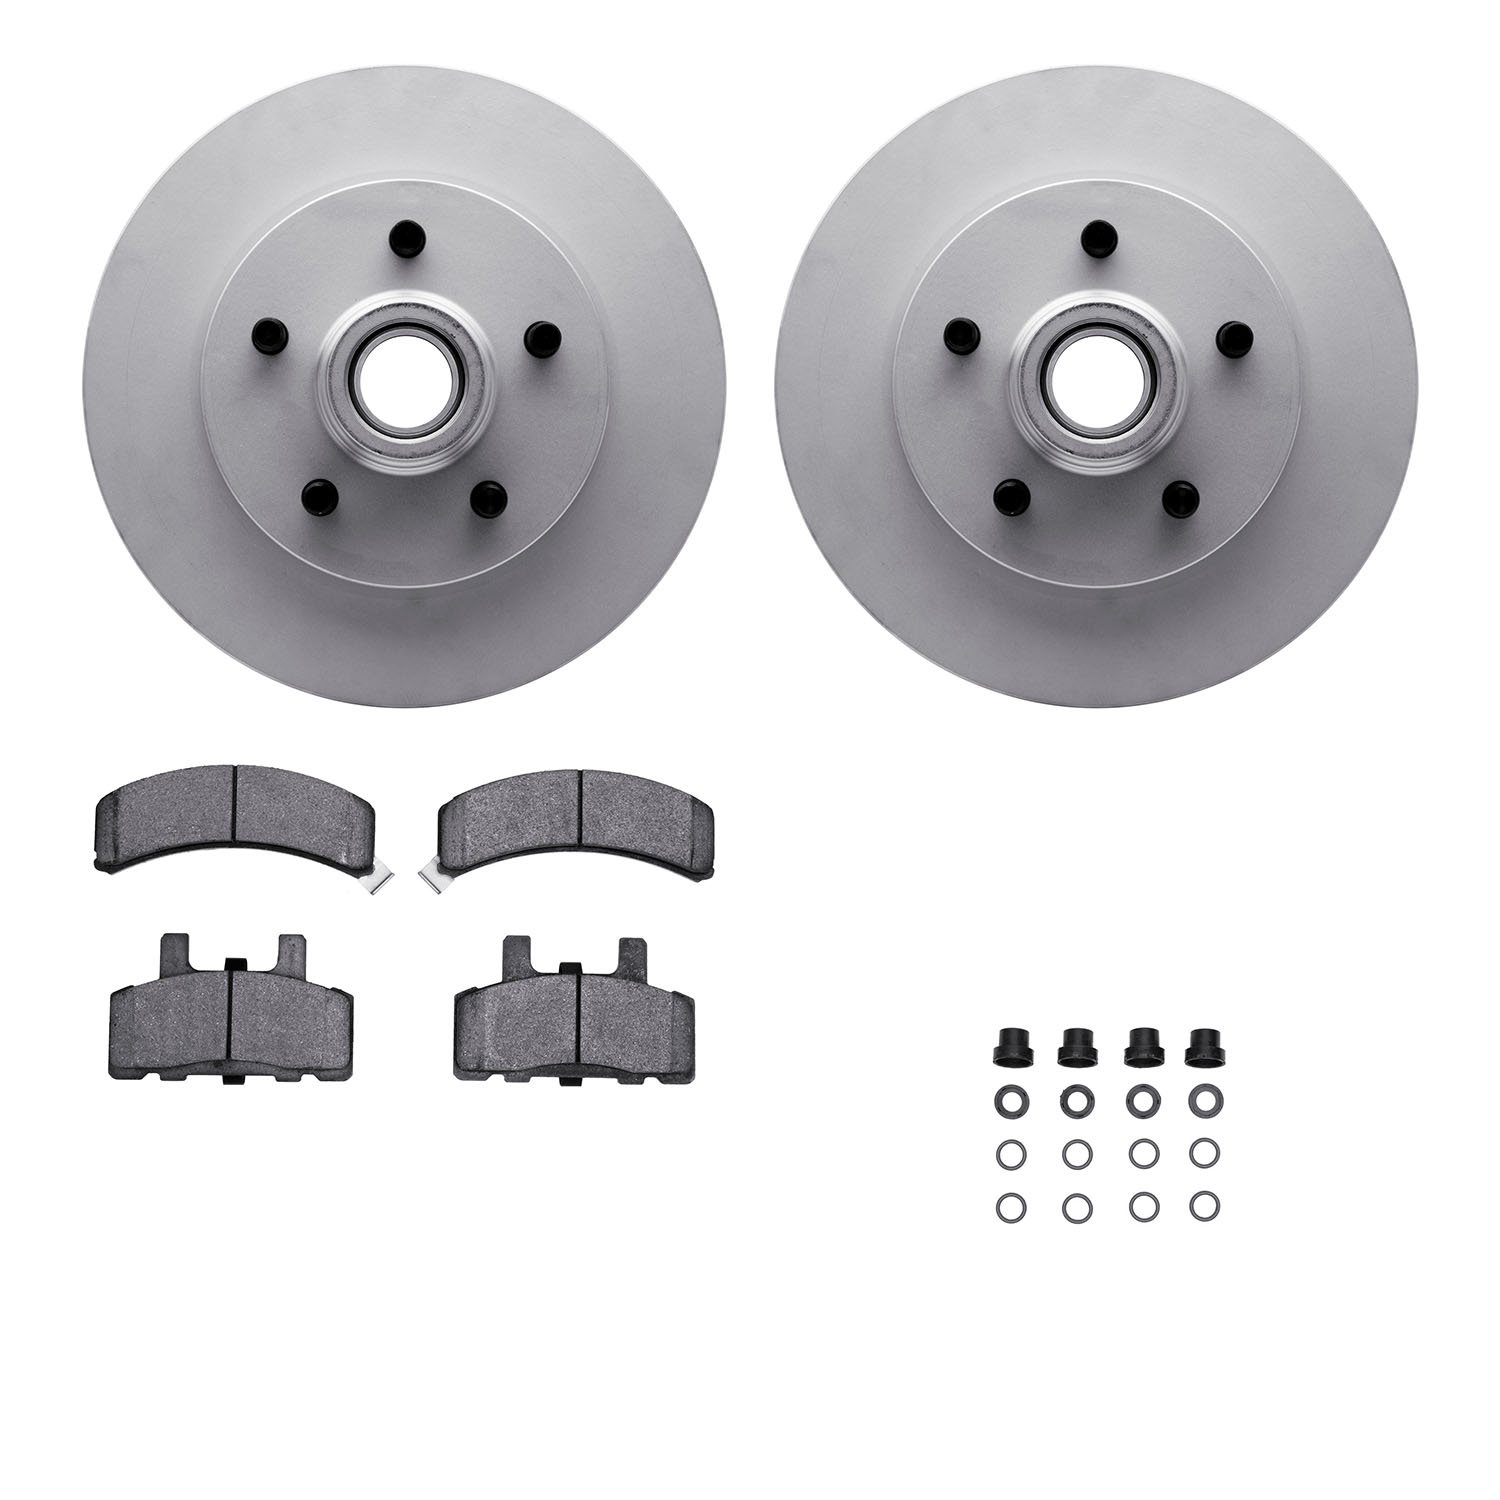 4412-48007 Geospec Brake Rotors with Ultimate-Duty Brake Pads & Hardware, 1992-2002 GM, Position: Front